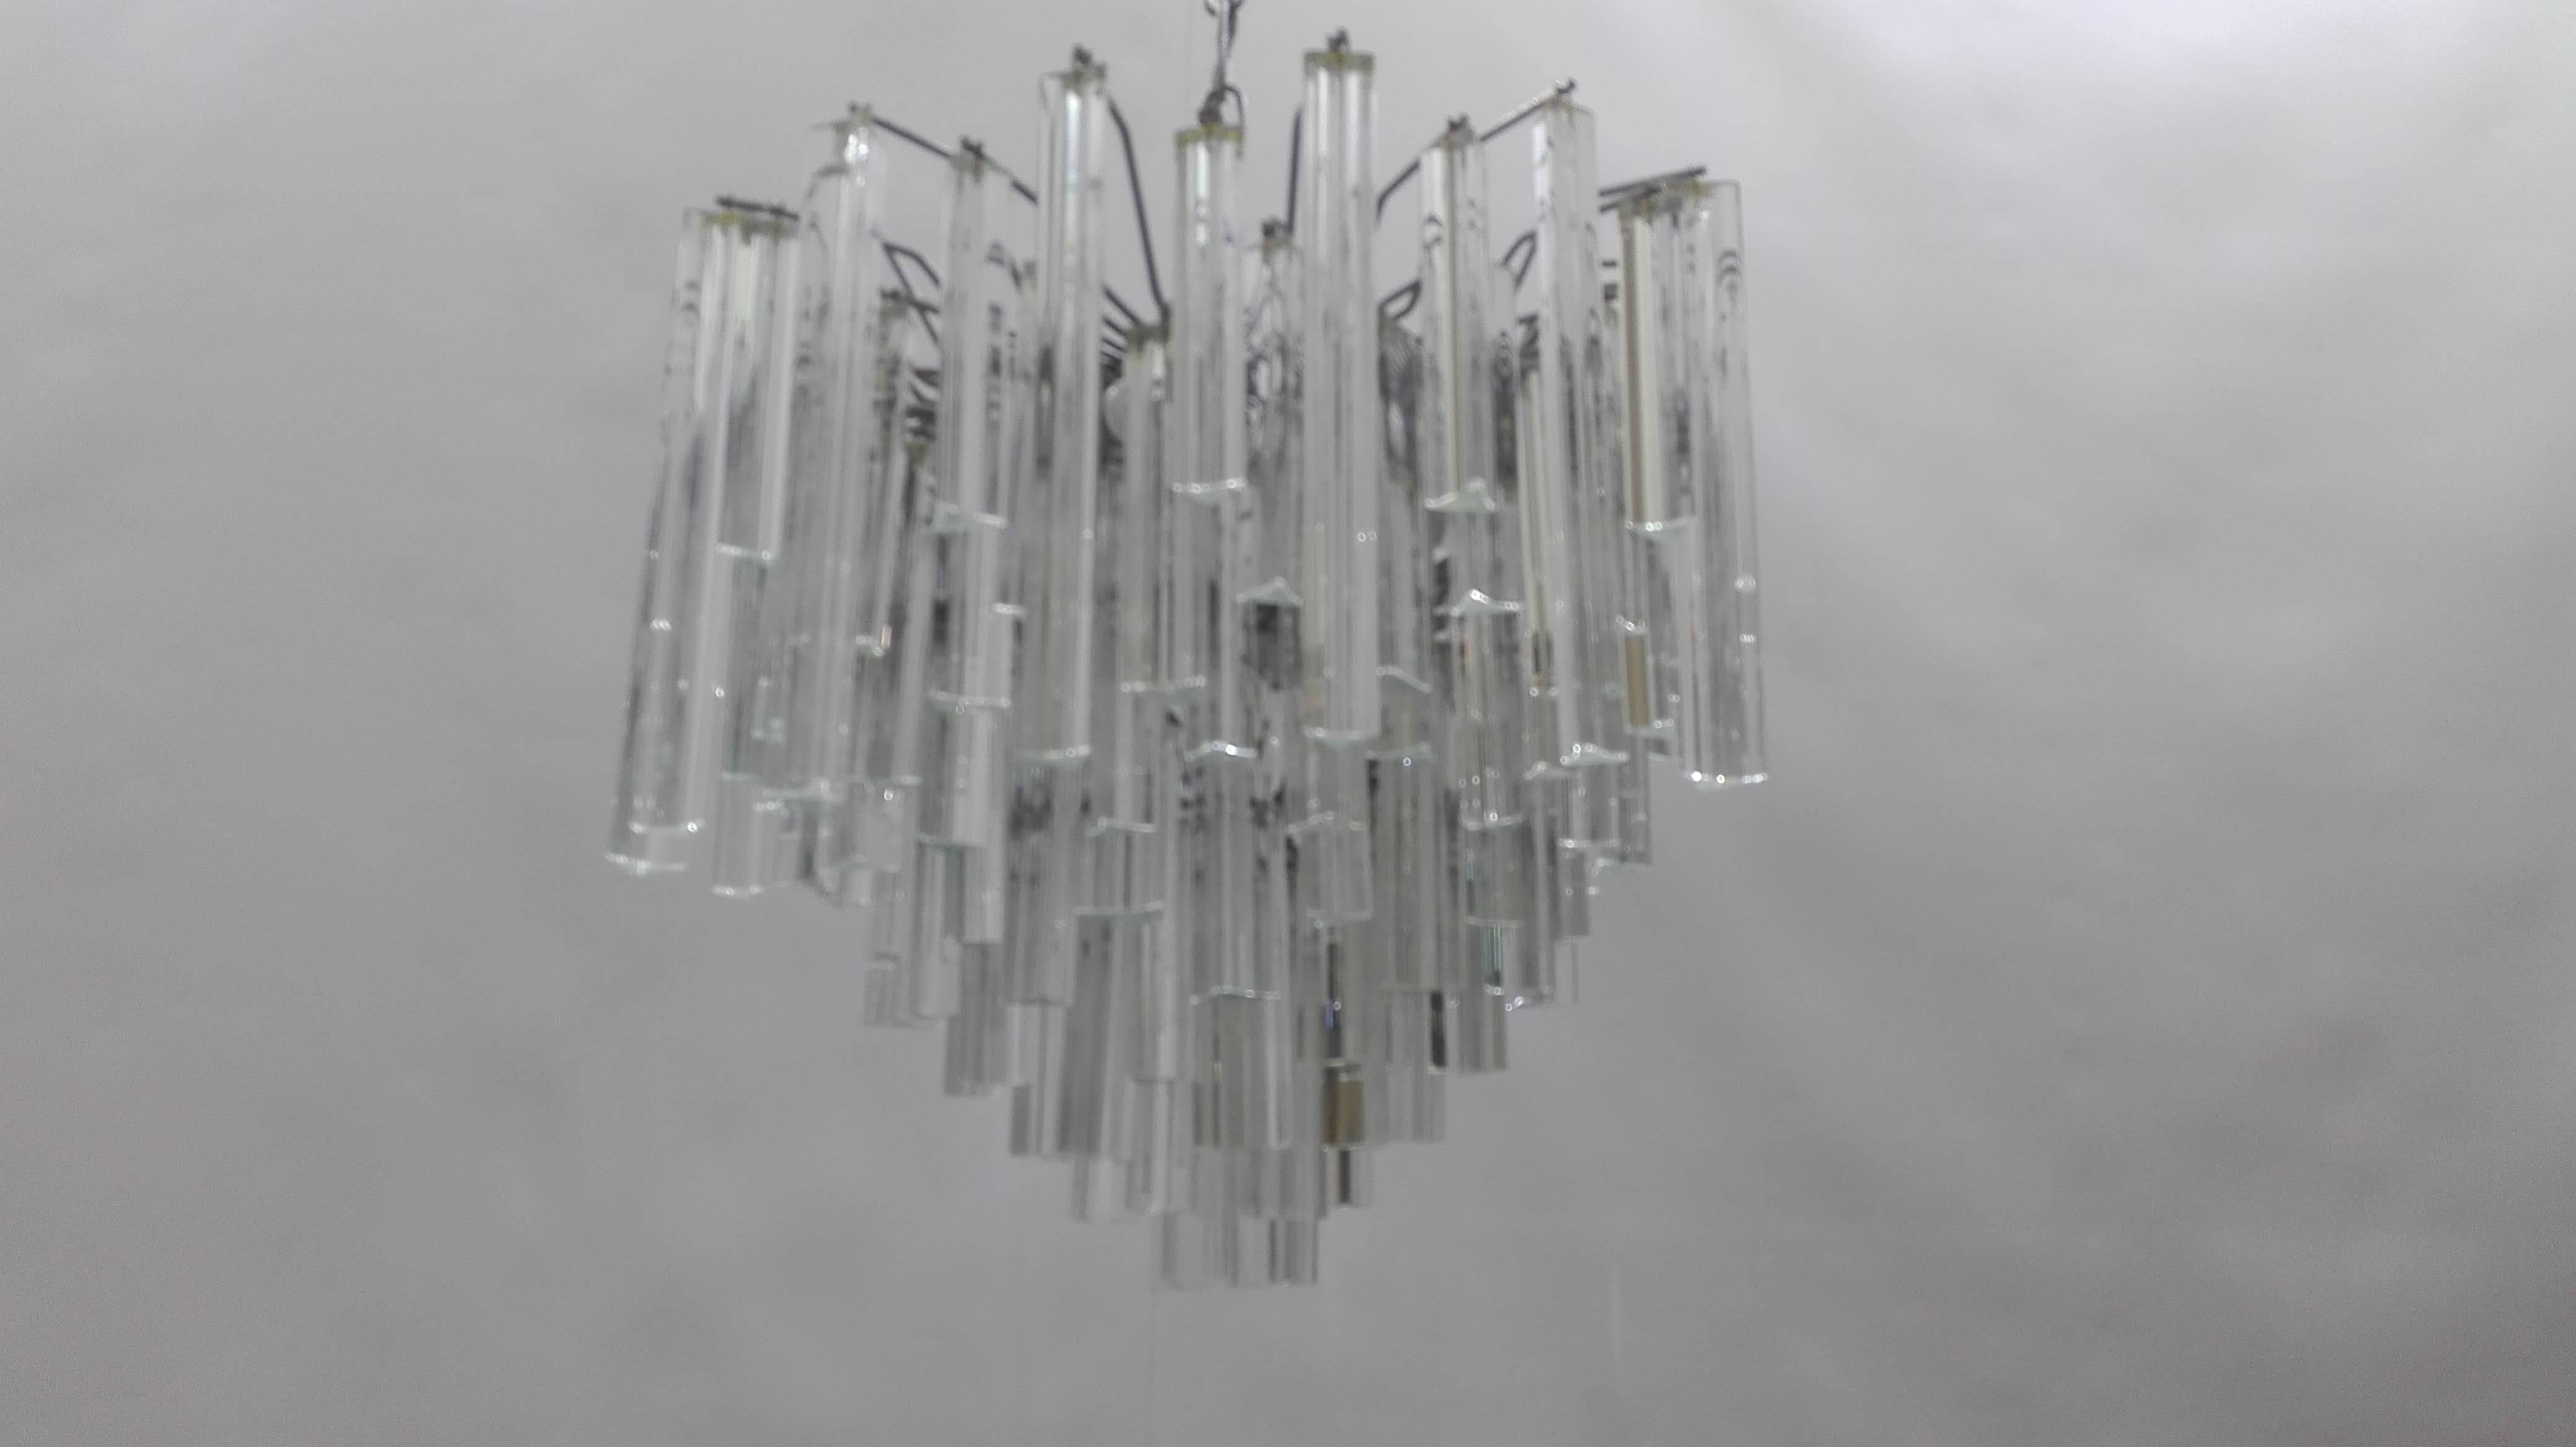 
Paolo Venini chandelier hanging glass pendants prism make this chandelier. And 'Italian and in most levels cage was silver plated.